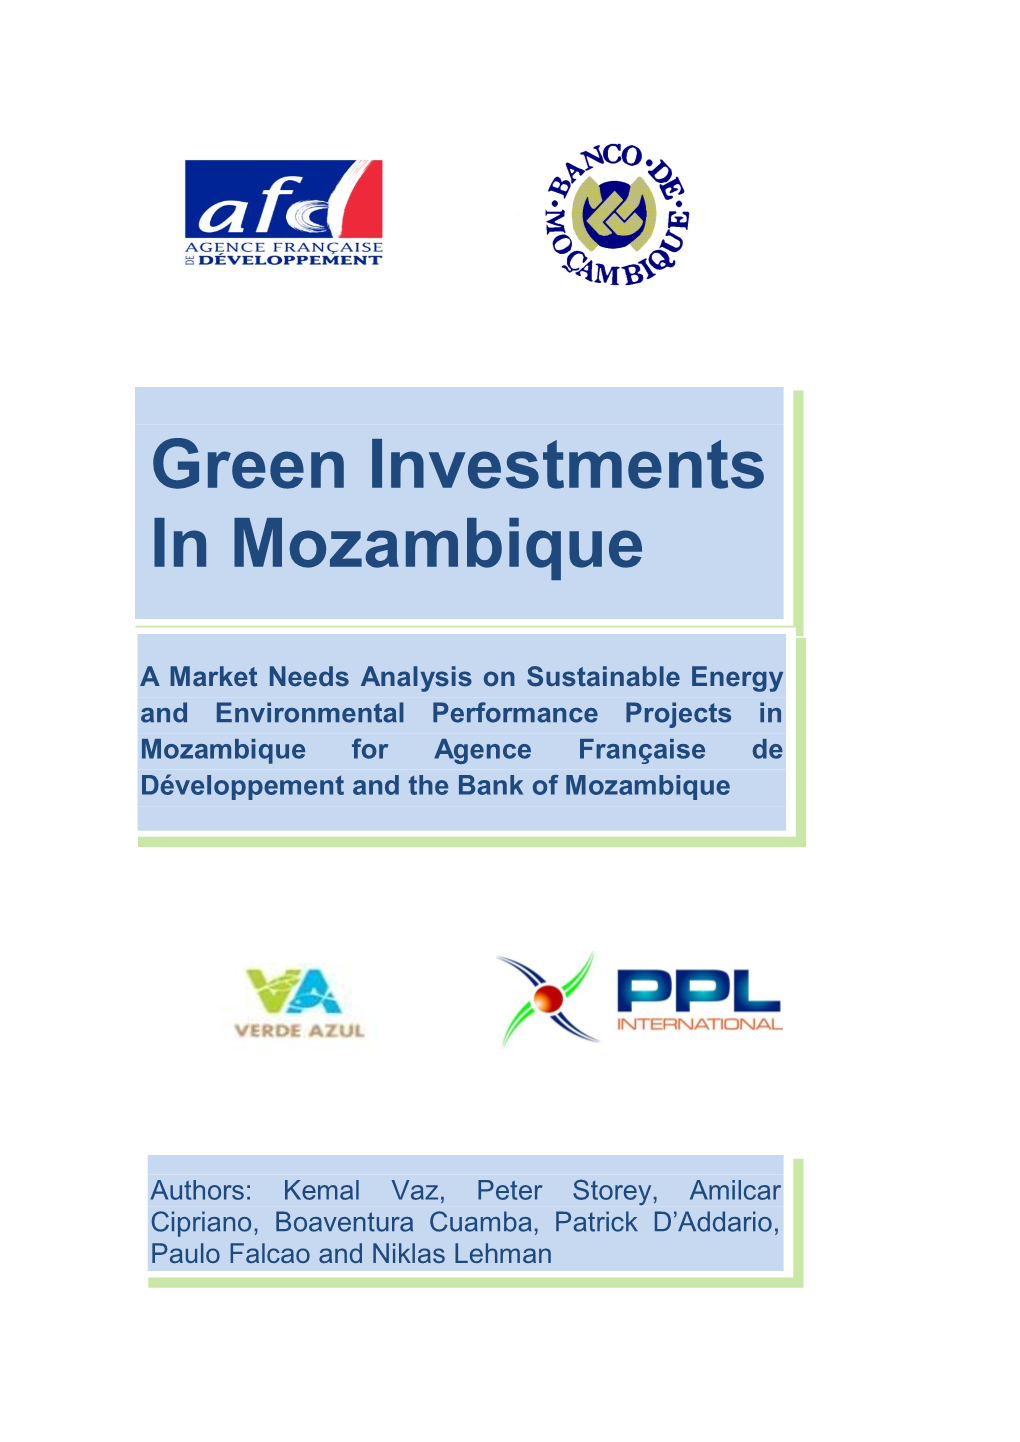 Green Investments in Mozambique